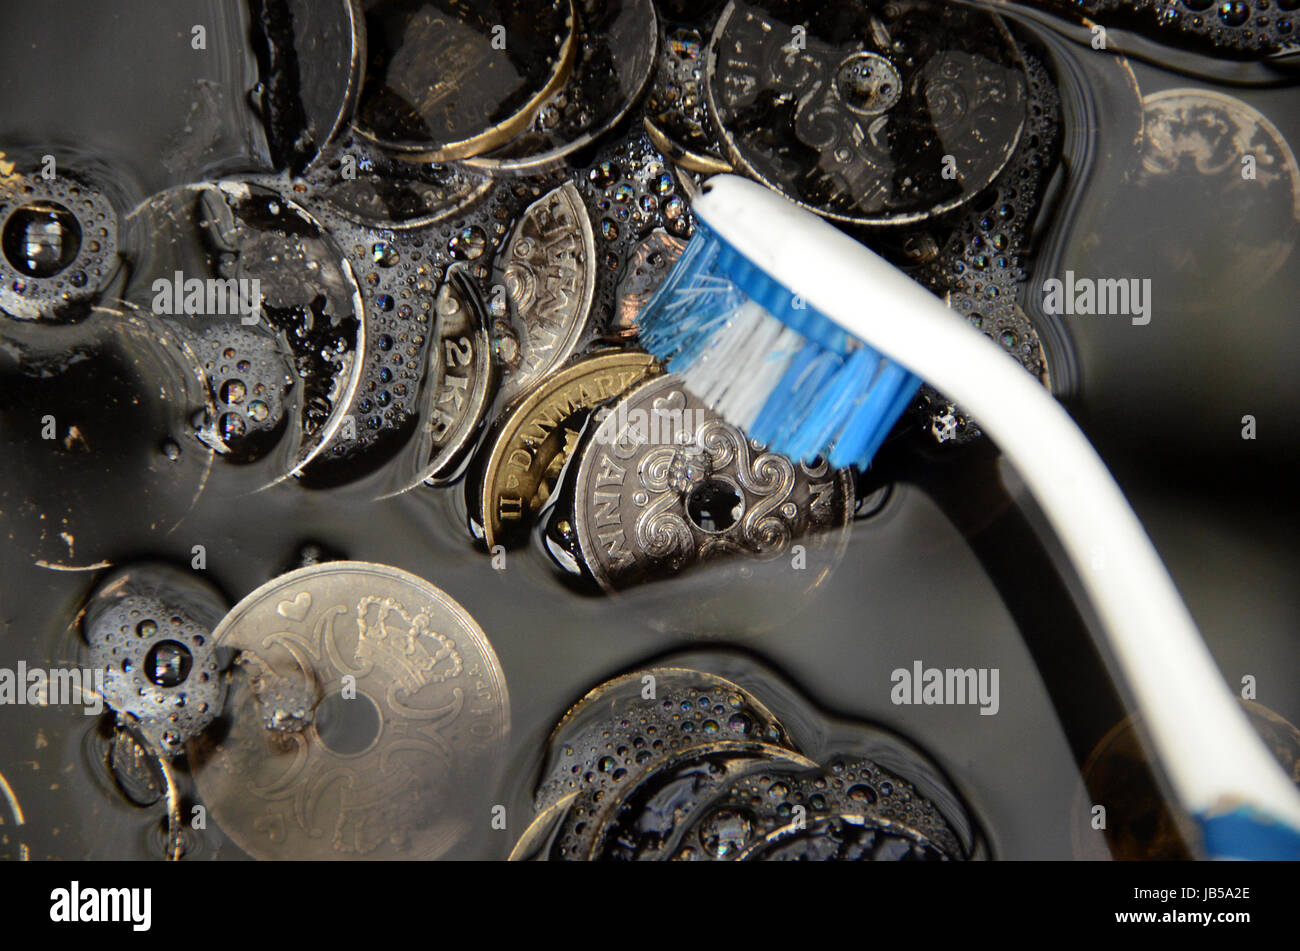 Black Danisk Krone coins being washed, suggesting the term 'whitewash of black money' Stock Photo